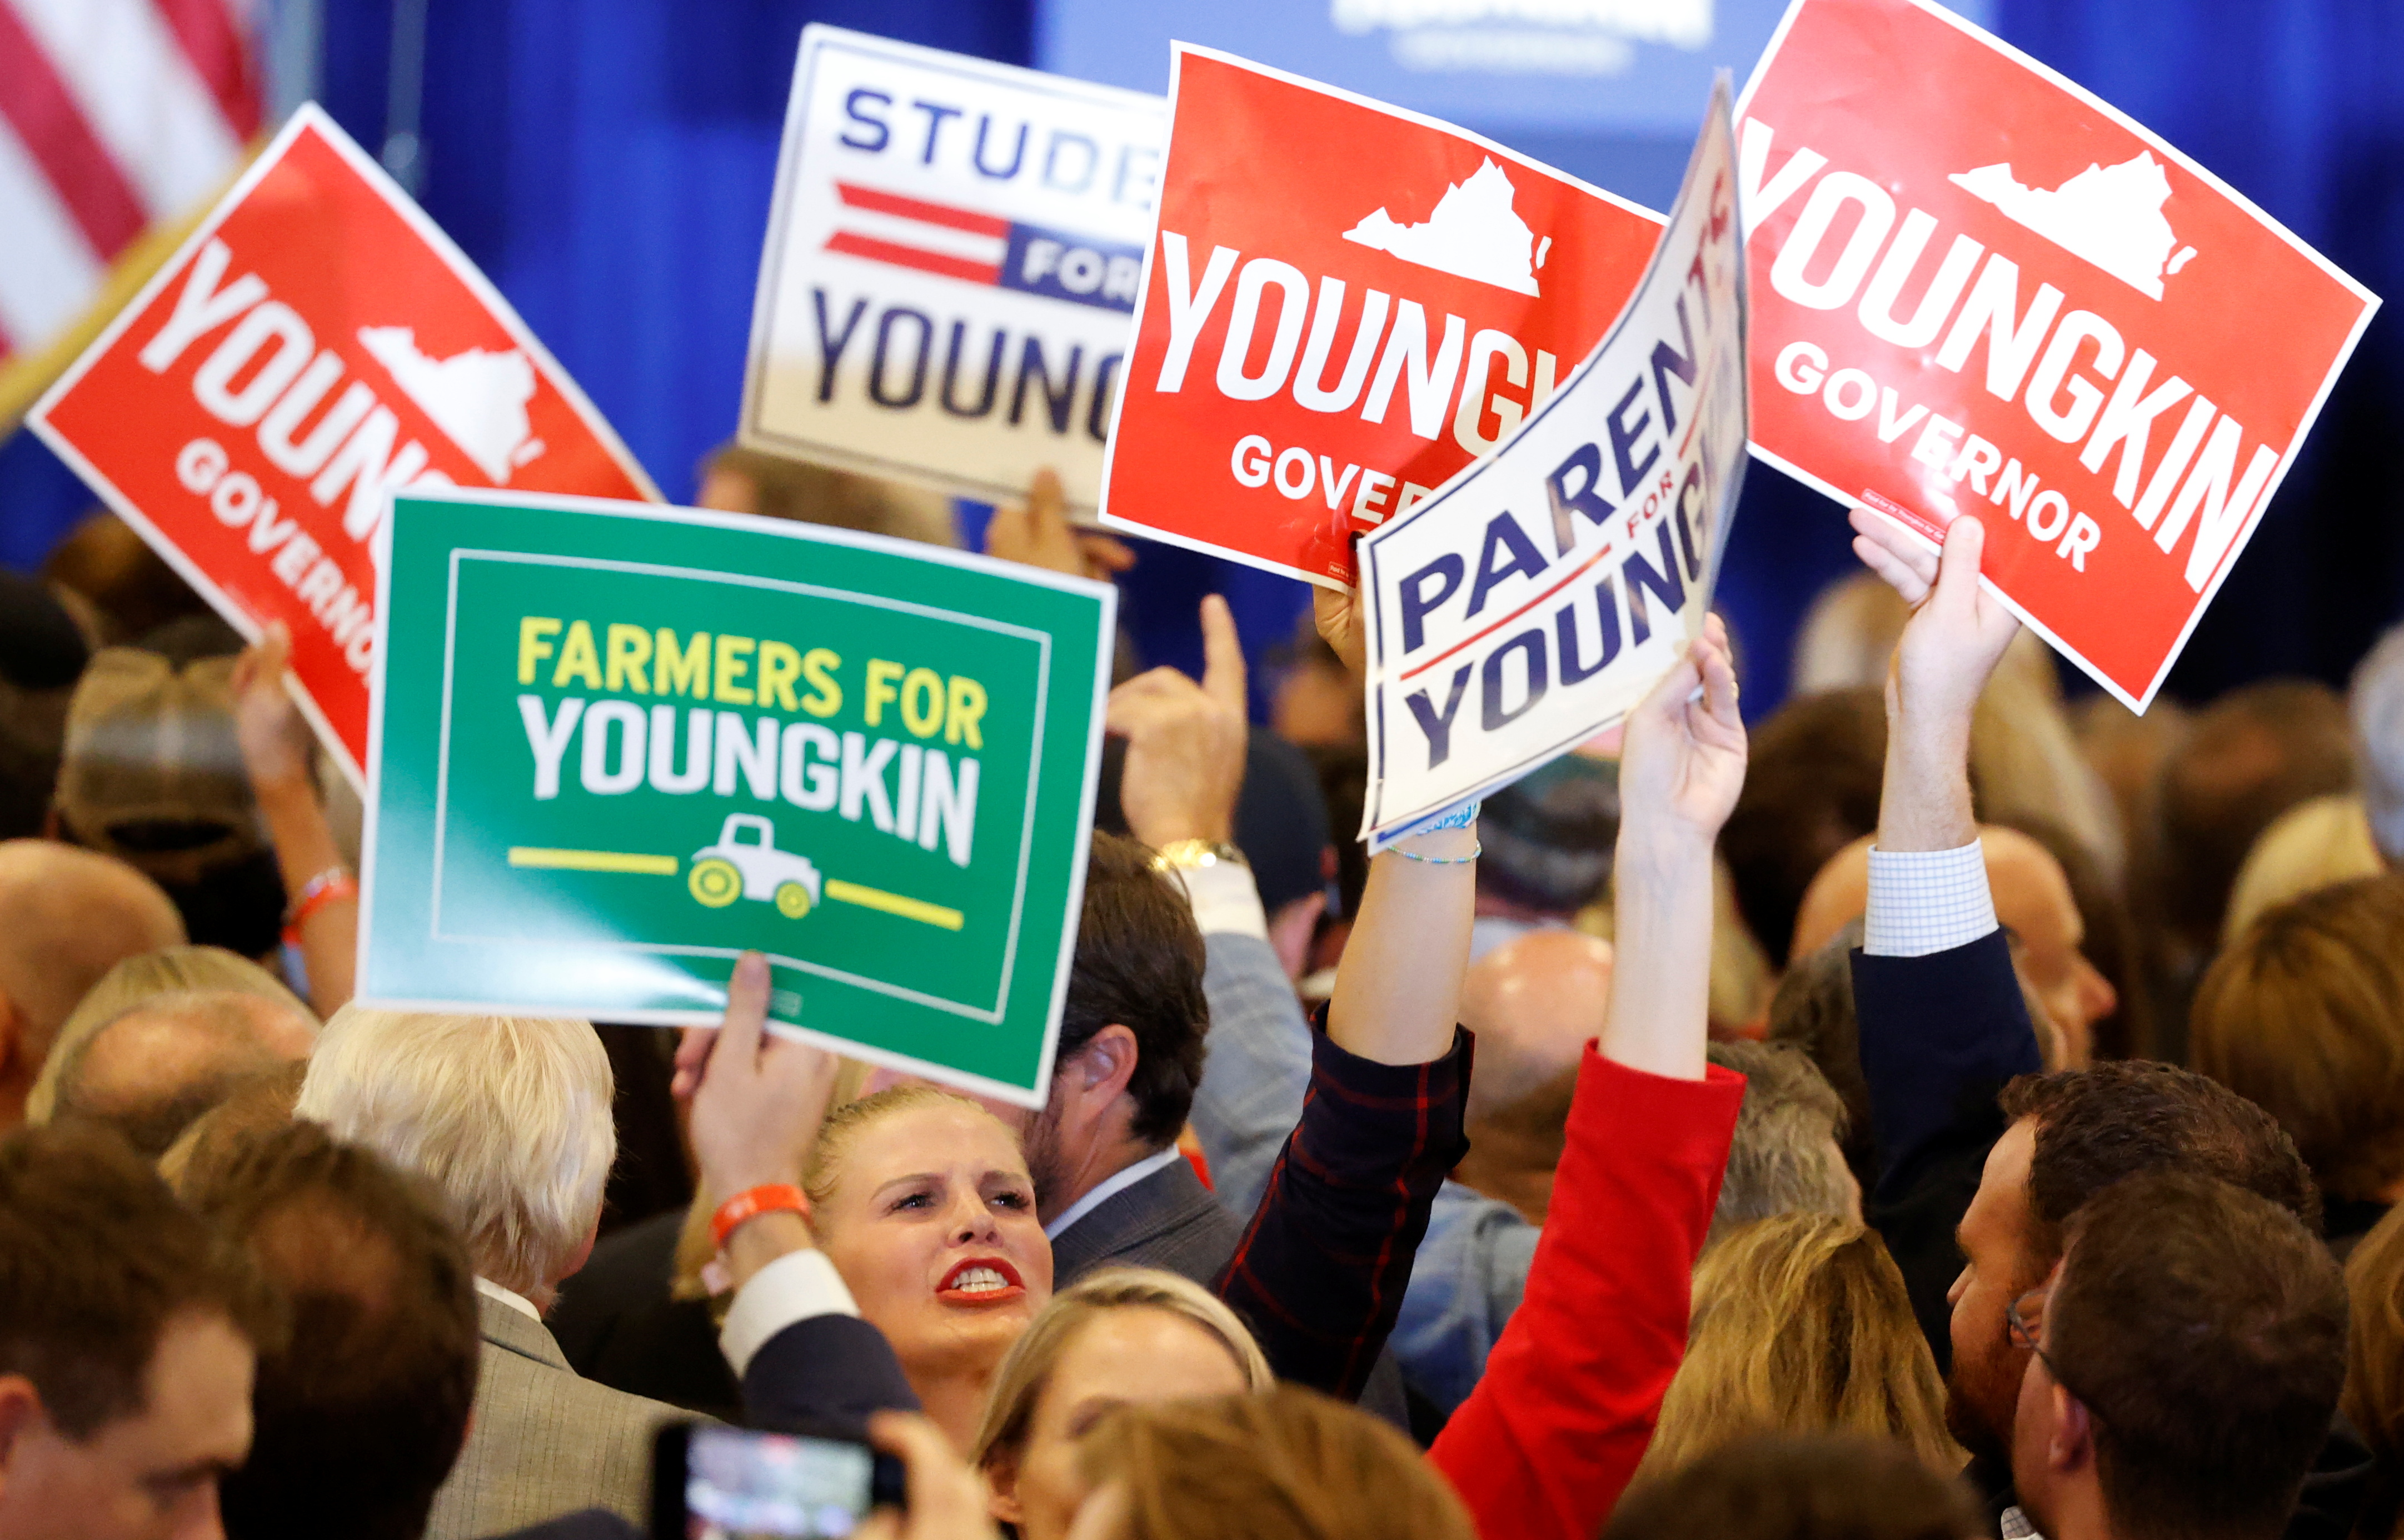 Supporters of Republican nominee for Governor of Virginia Glenn Youngkin celebrate as they see results come in on television during an election night party at a hotel in Chantilly, Virginia, U.S., November 2, 2021. REUTERS/ Jonathan Ernst